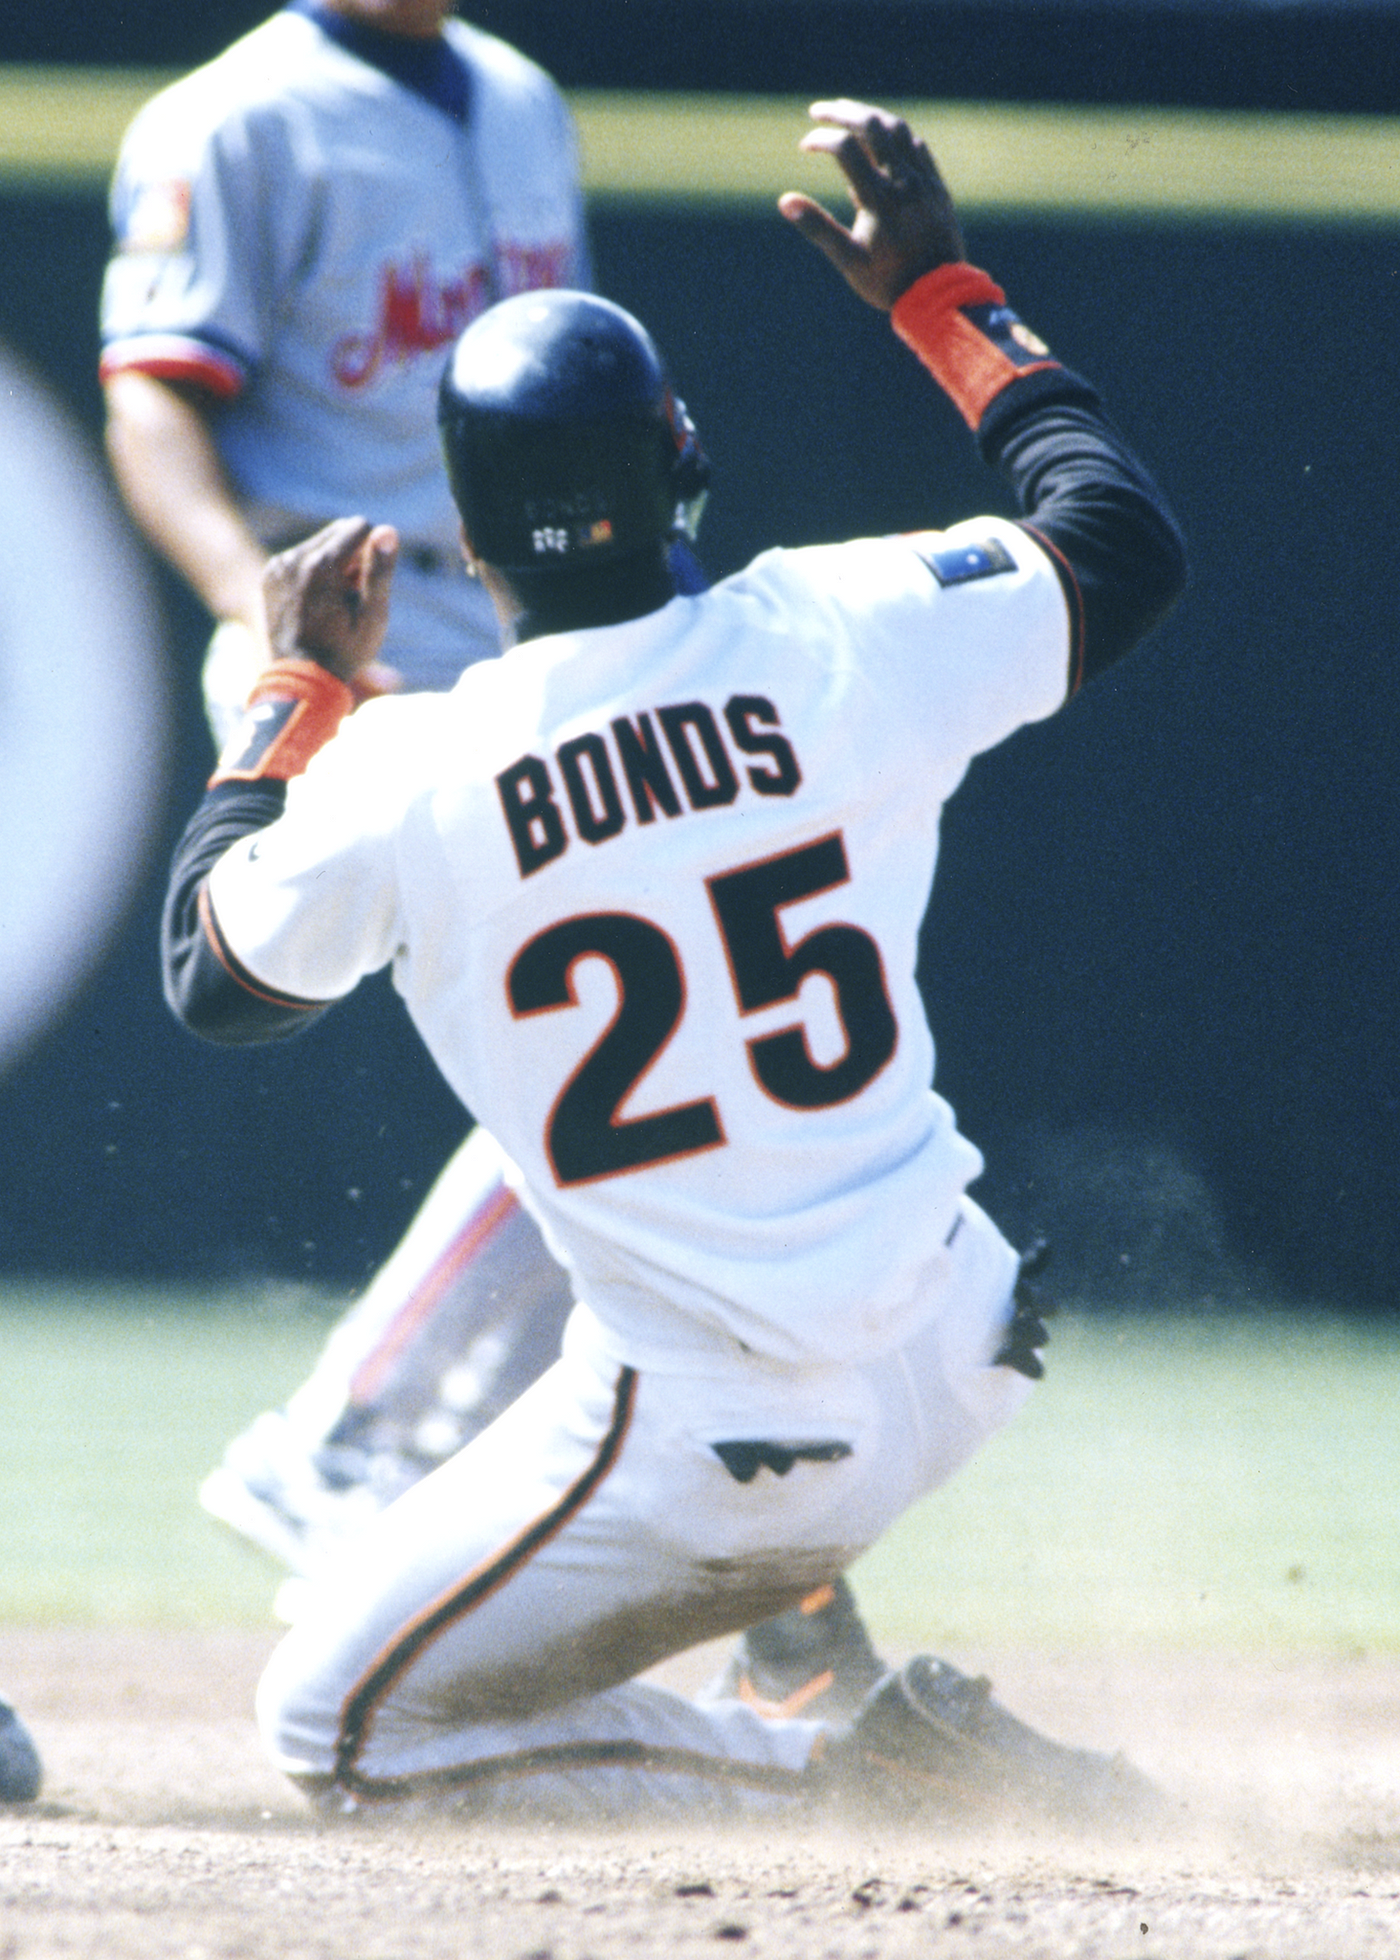 Barry Bonds of the San Francisco Giants hits a home run in an